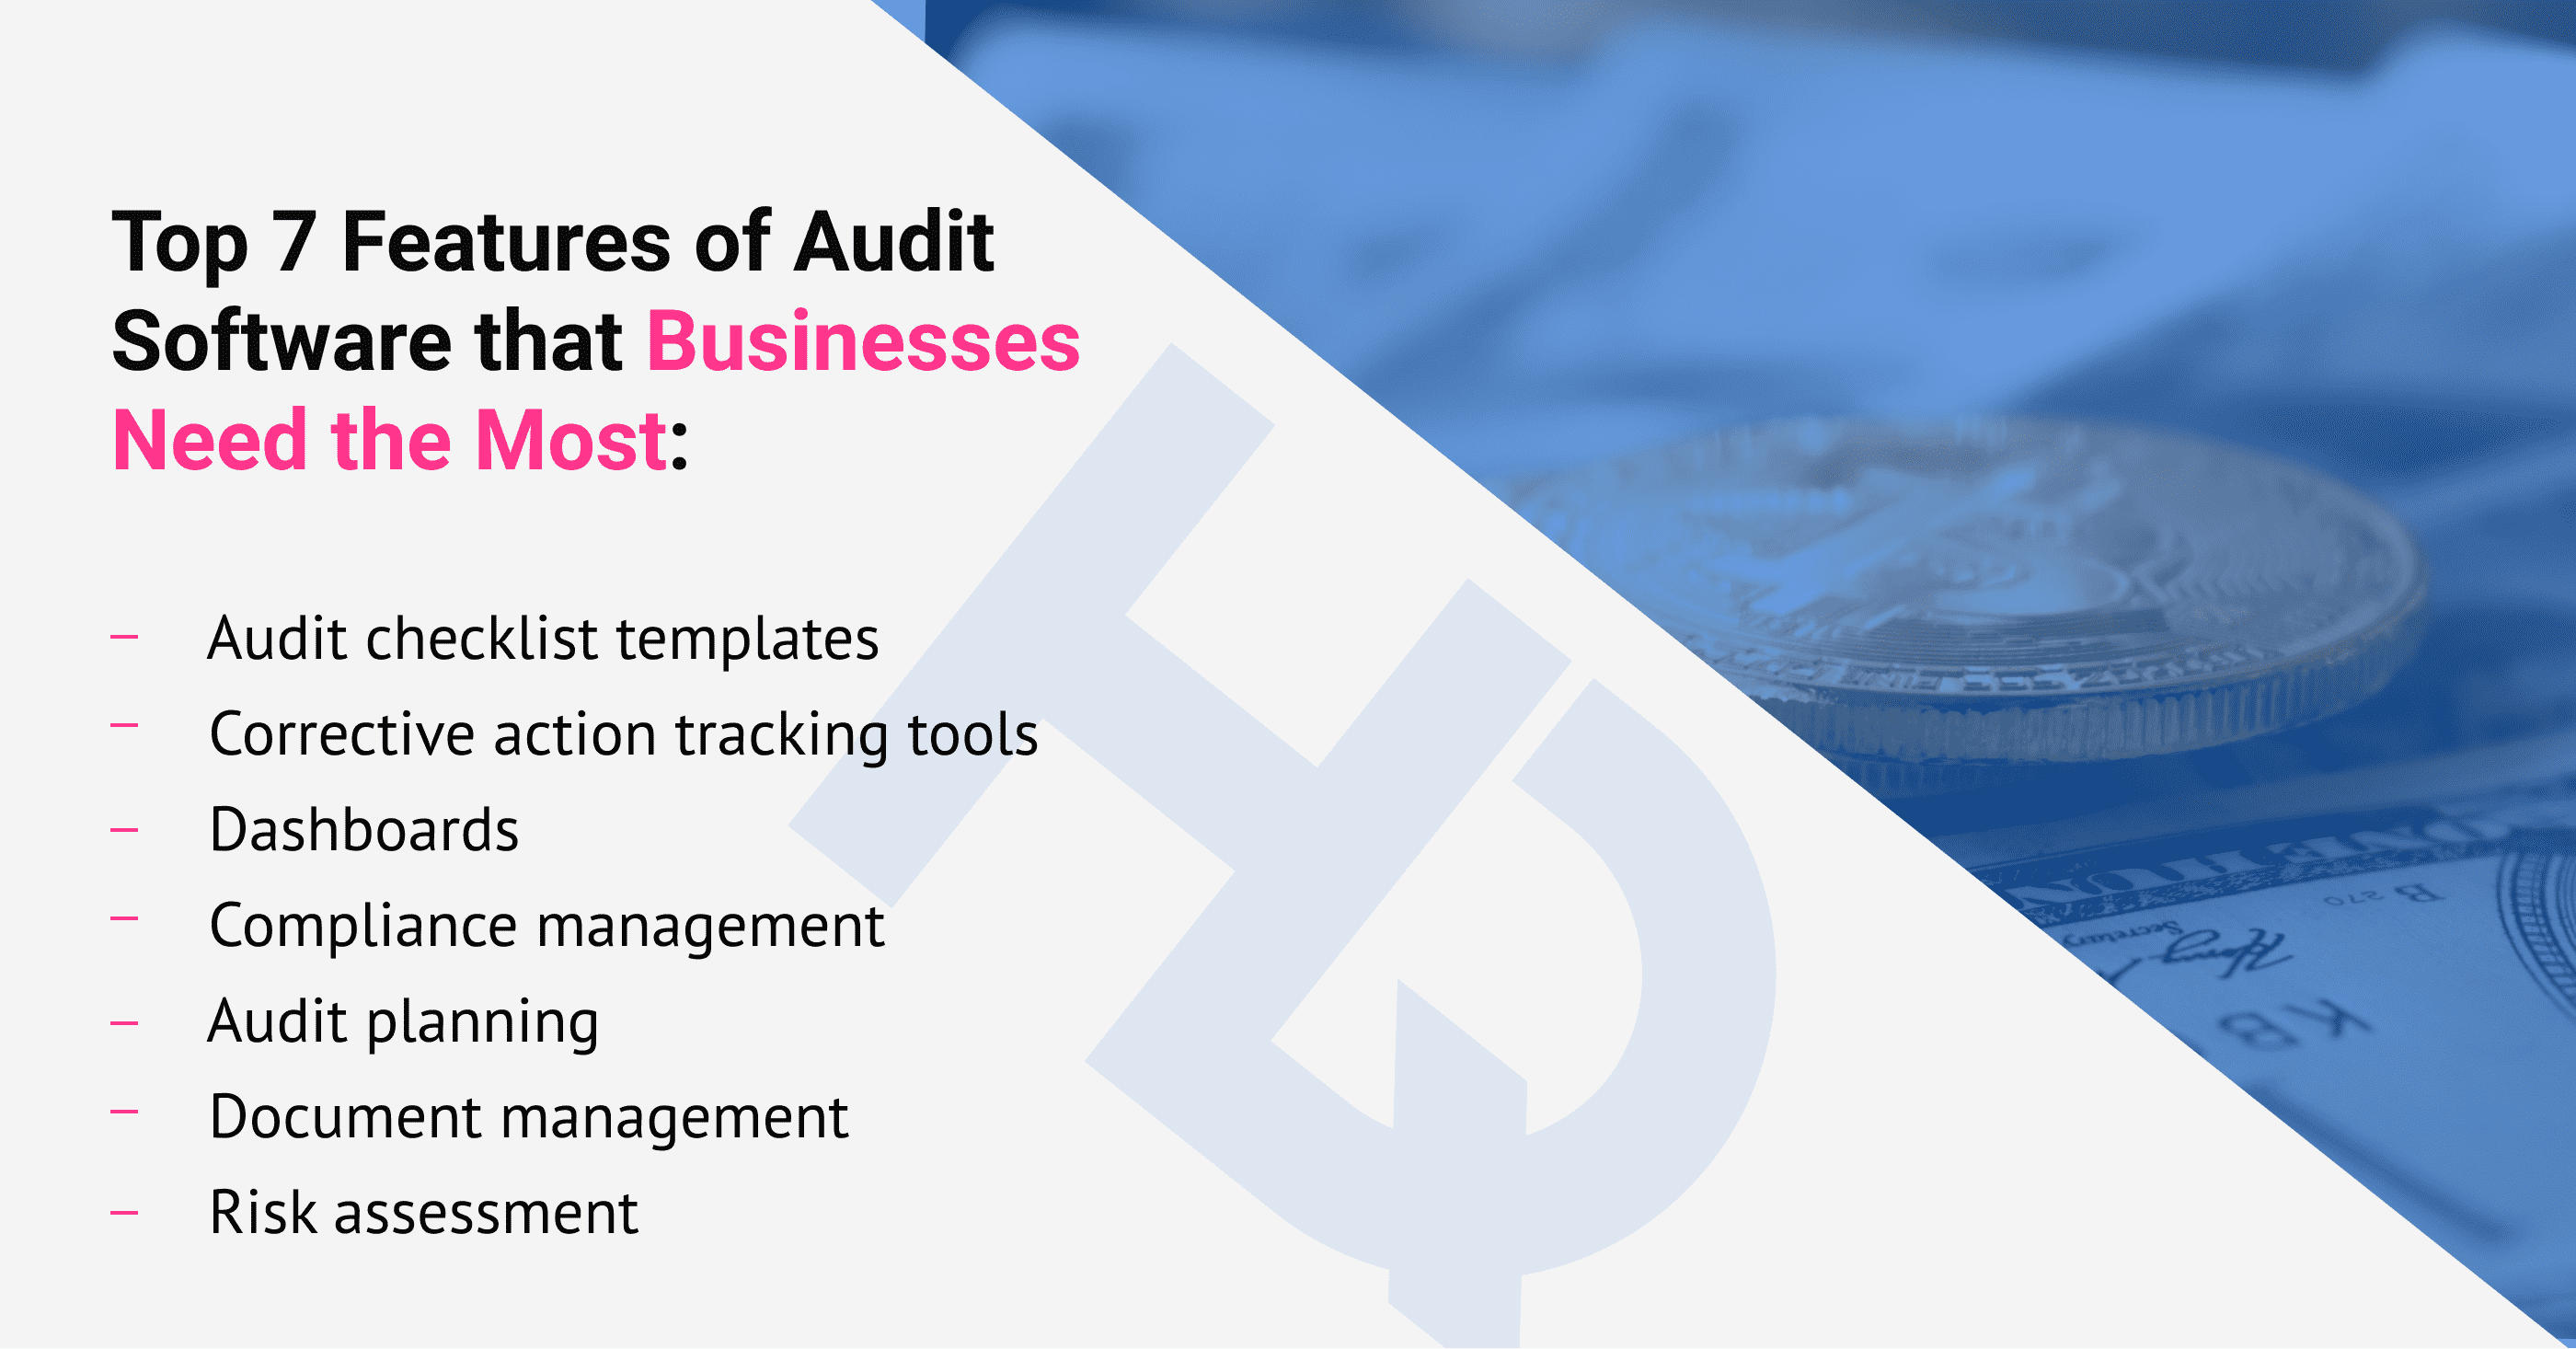 Top 7 features of audit software.